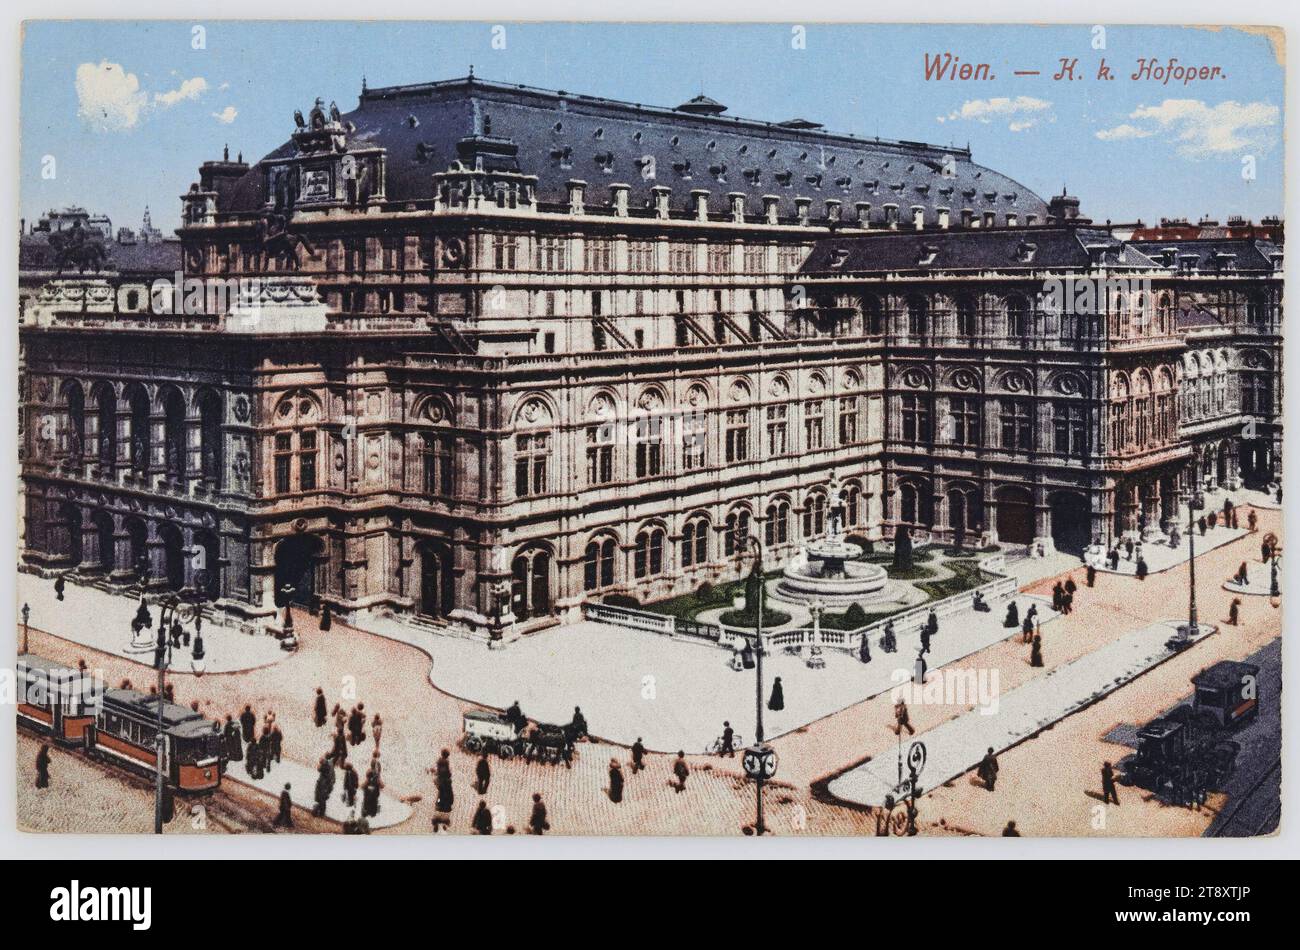 Vienna. - K. k. Court Opera, Unknown, 1912, coated paperboard, photochrome, Inscription, FROM, Vienna, TO, Innsbruck, ADDRESS, To Miss, in Marienheim, Innsbruck, Maximilianstrasse 55, MESSAGE, Dear Helene, The confirmation program went very well despite Regegen [=rain?] to the greatest satisfaction of all, more until we are back in Steyr, Ida Saturday morning 10[? ] clock died Greetings to father [signature], Music, Theatre, Attractions, Ringstraße, Public Transport, Media and Communication, traffic and transport, Postcards with transliteration, 1st District: Innere Stadt Stock Photo